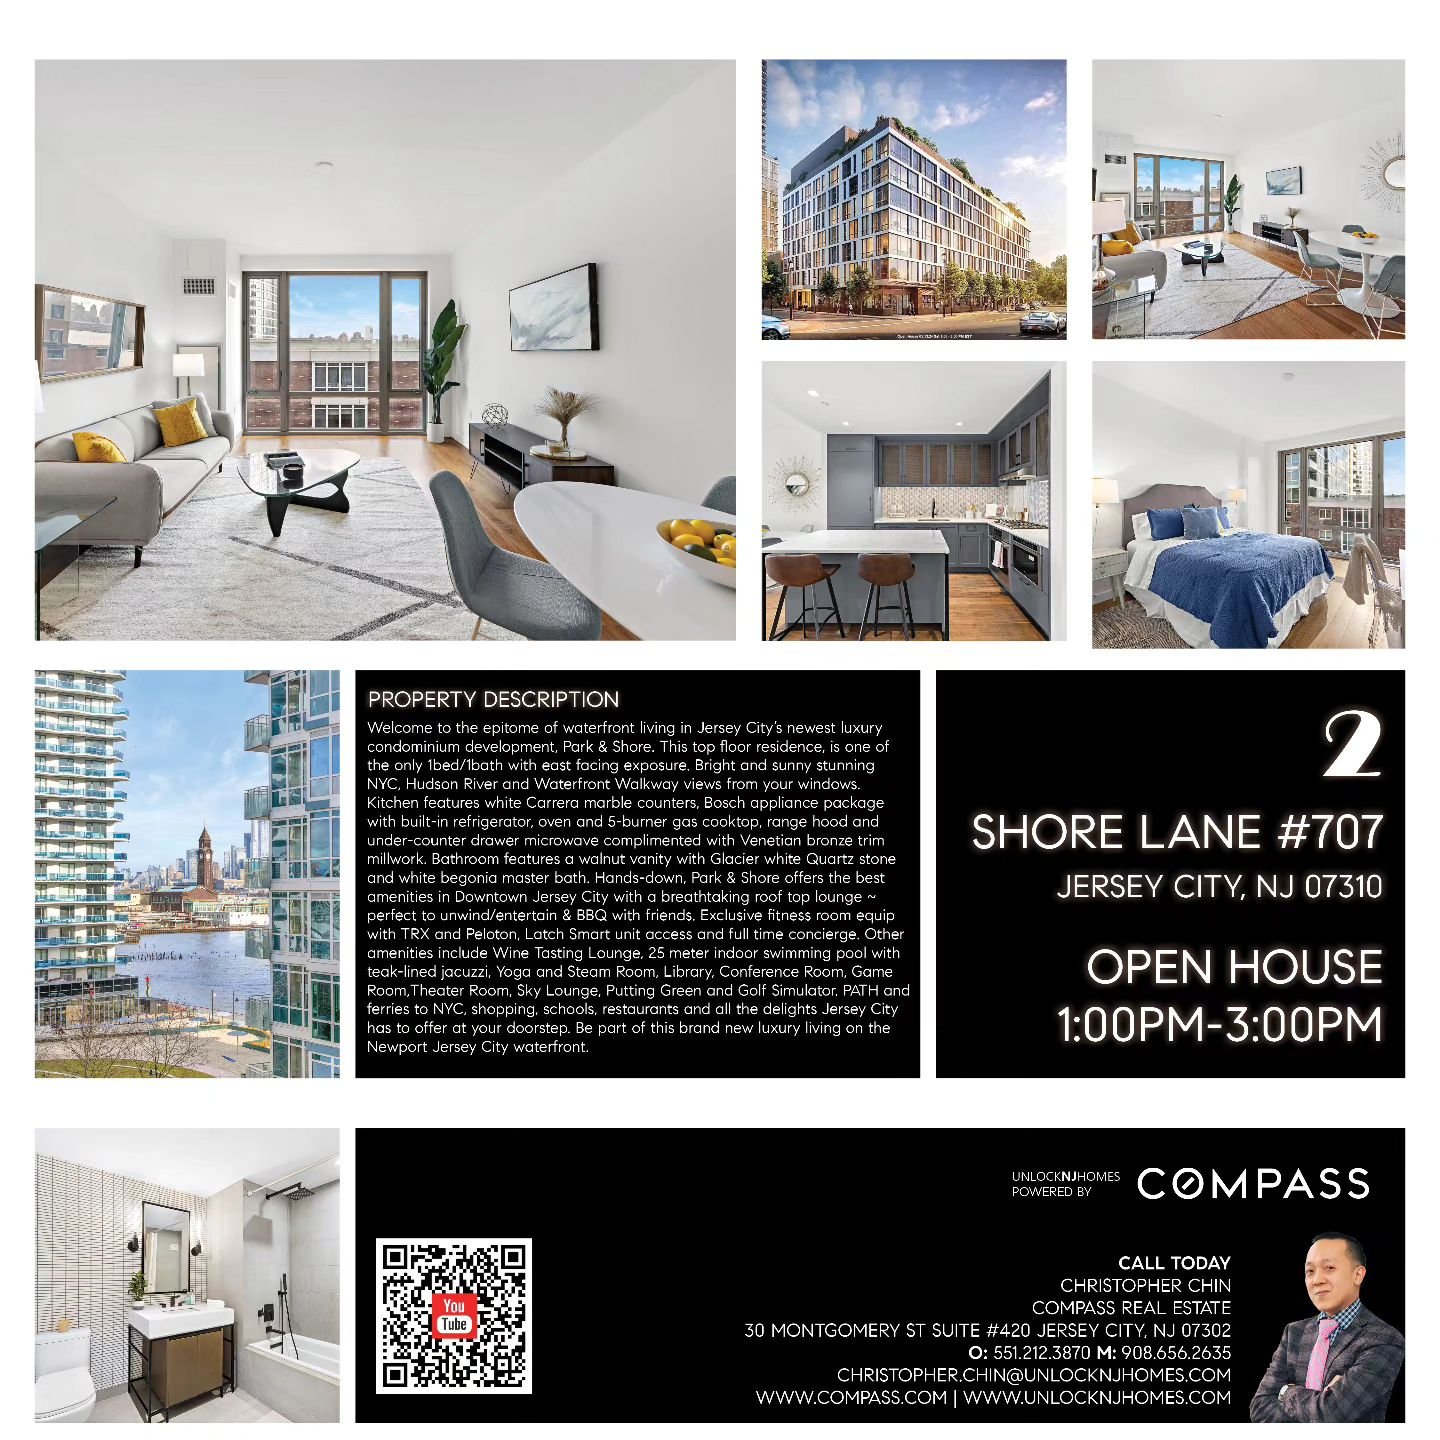 🎊🎊 Open House tomorrow! 🎊🎊🎊
Sunday January 14th
1:00PM-3:00PM
2 Shore Lane Jersey City, NJ 07310 

✅️ Easy access to NYC
✅️ NYC, Hudson River and Waterfront Walkway views
✅️ Incredible amenities

This home is listed by Gilli Axel from Compass Re